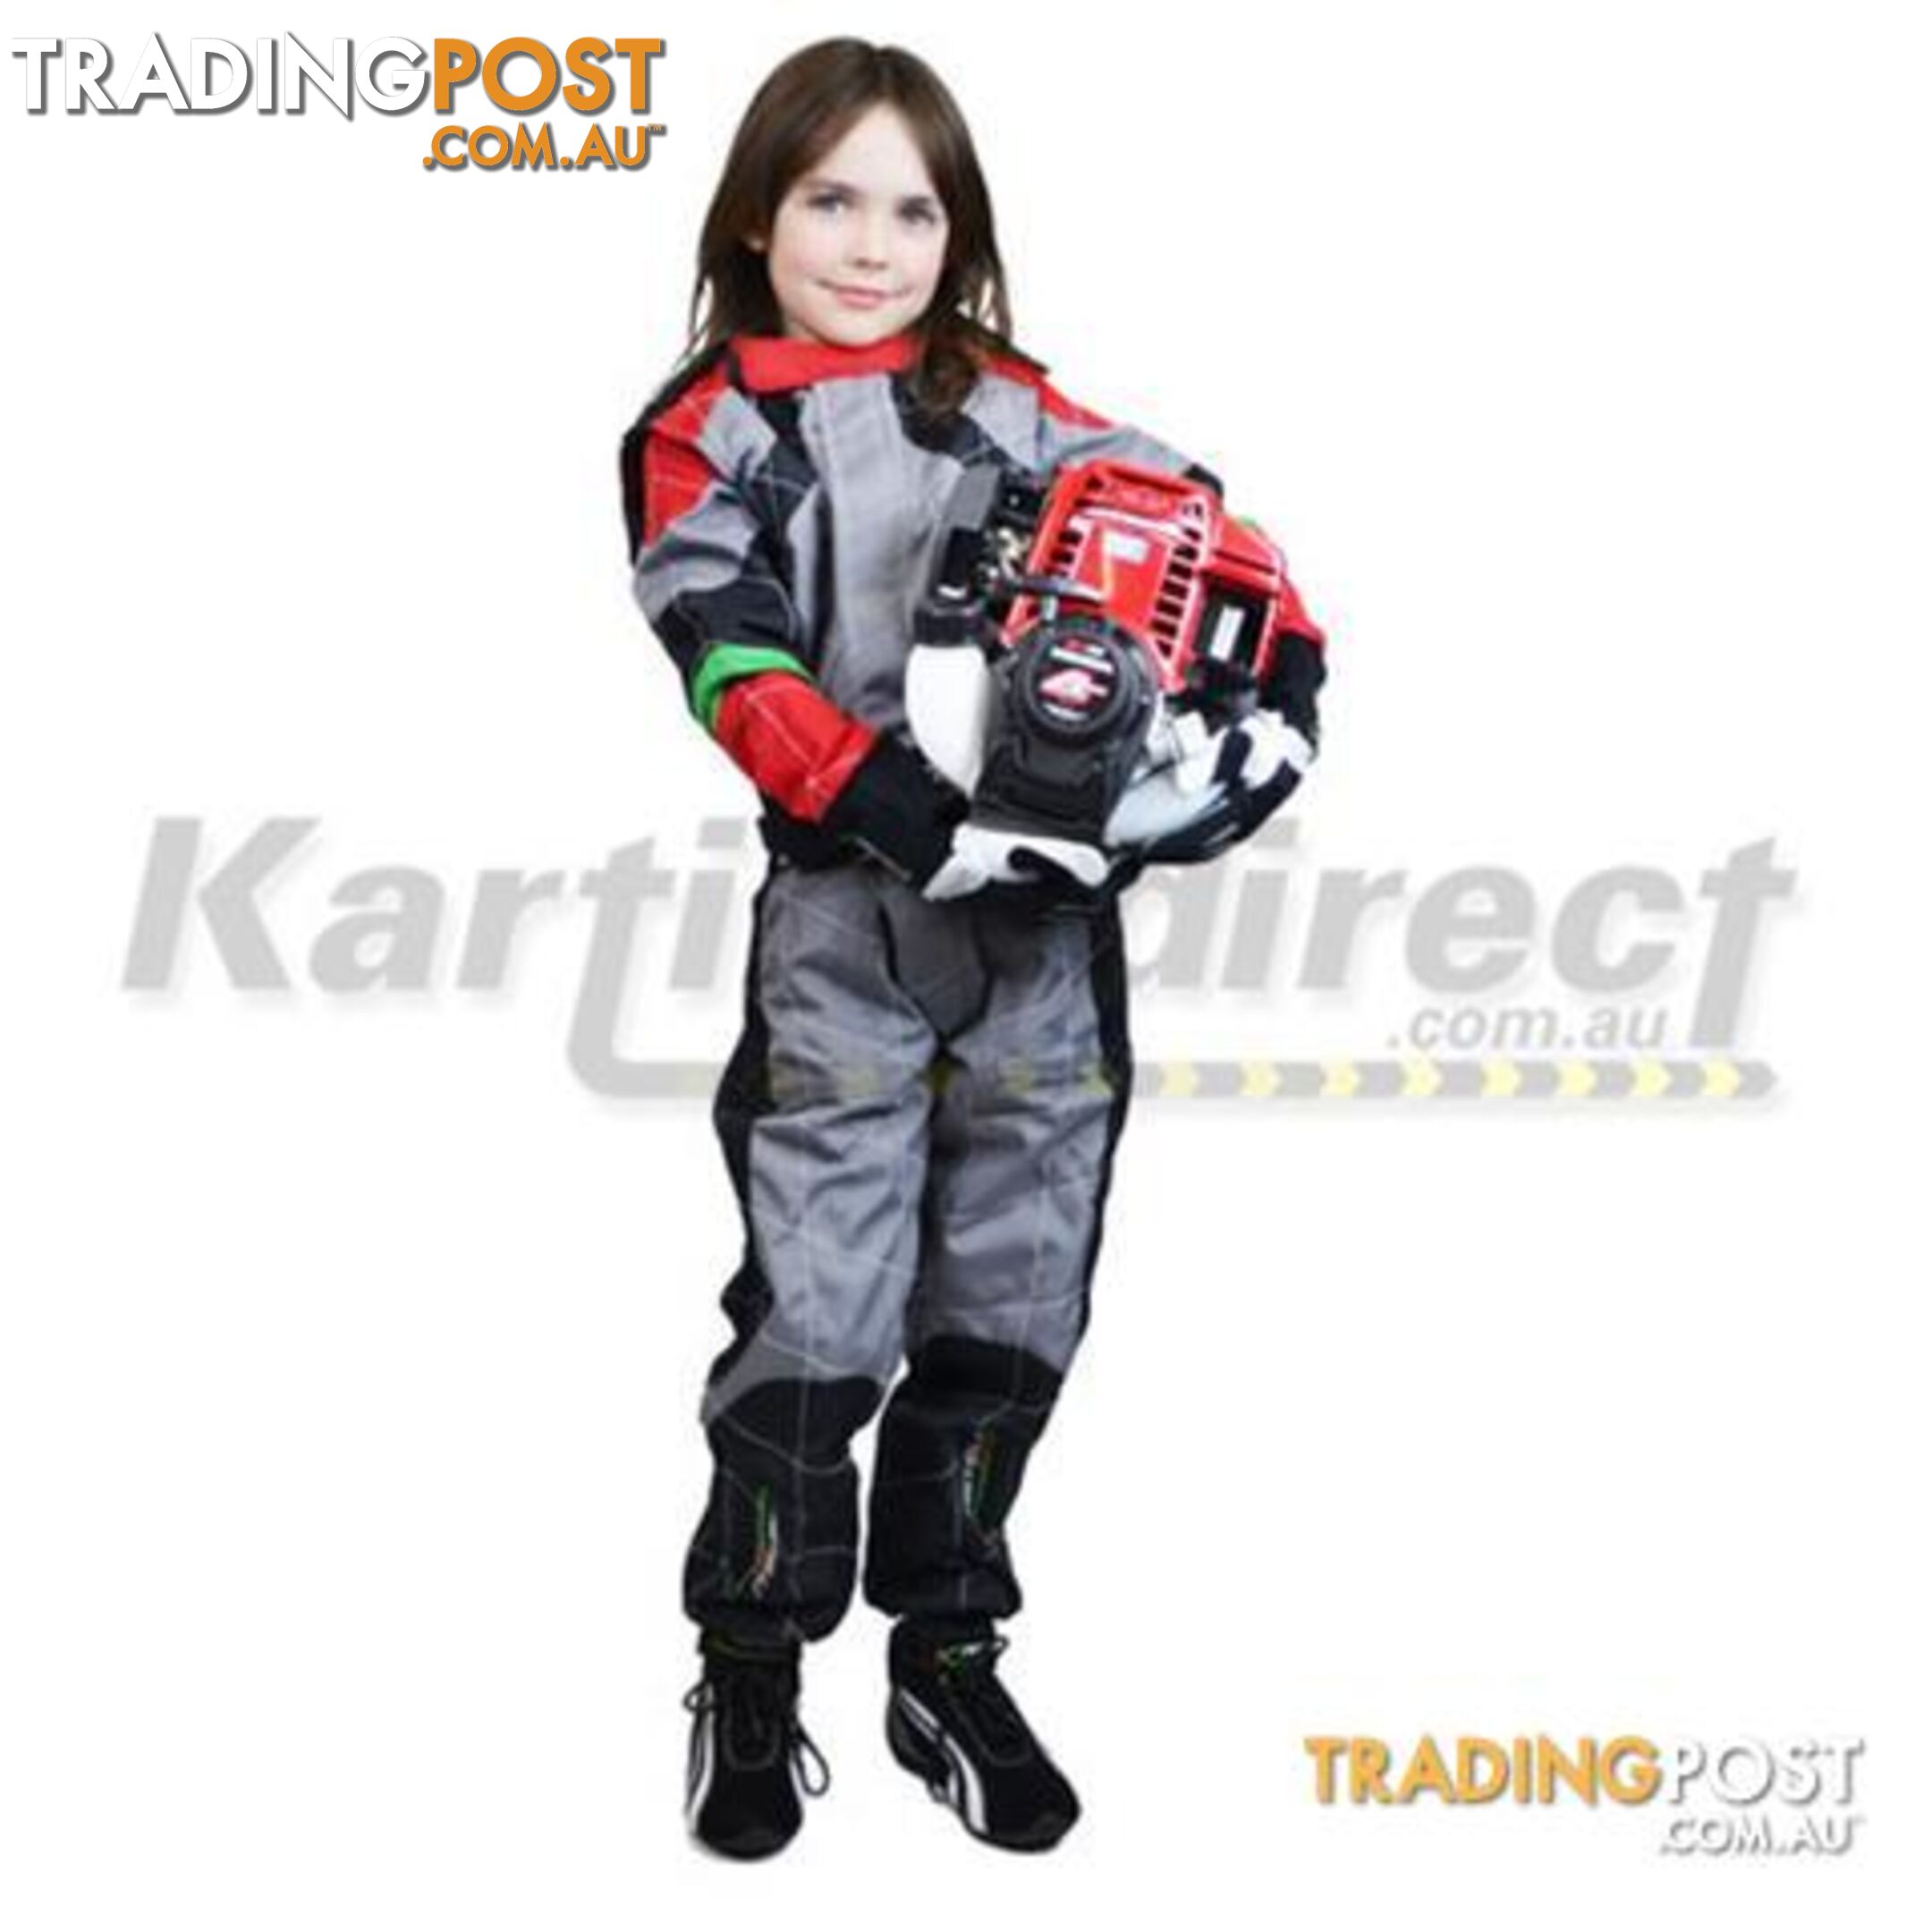 Go Kart Kartelli Corse Race Suit  Child Large - ALL BRAND NEW !!!